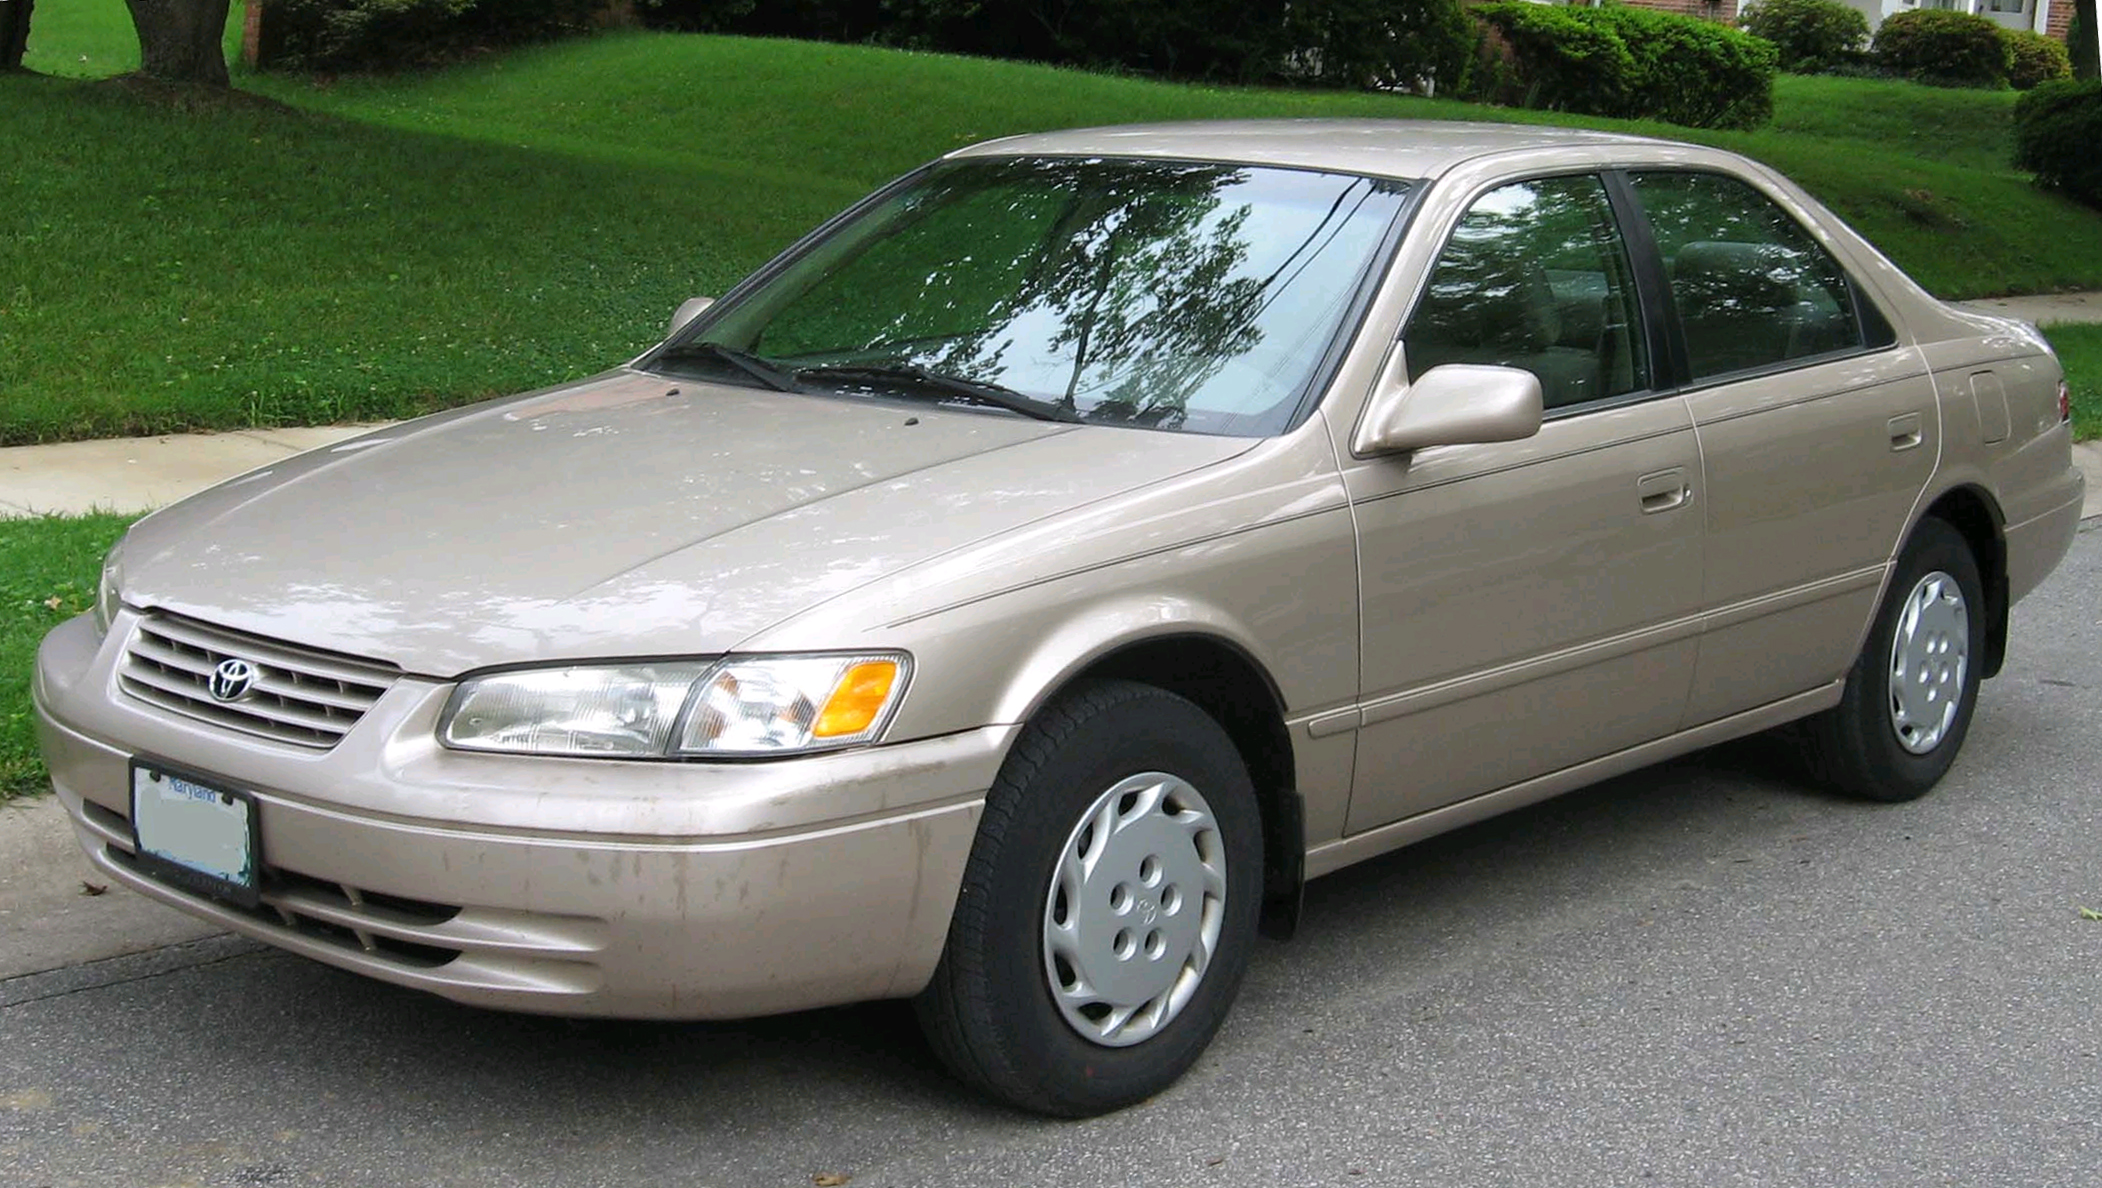 2001 toyota camry 4 cyl oil capacity